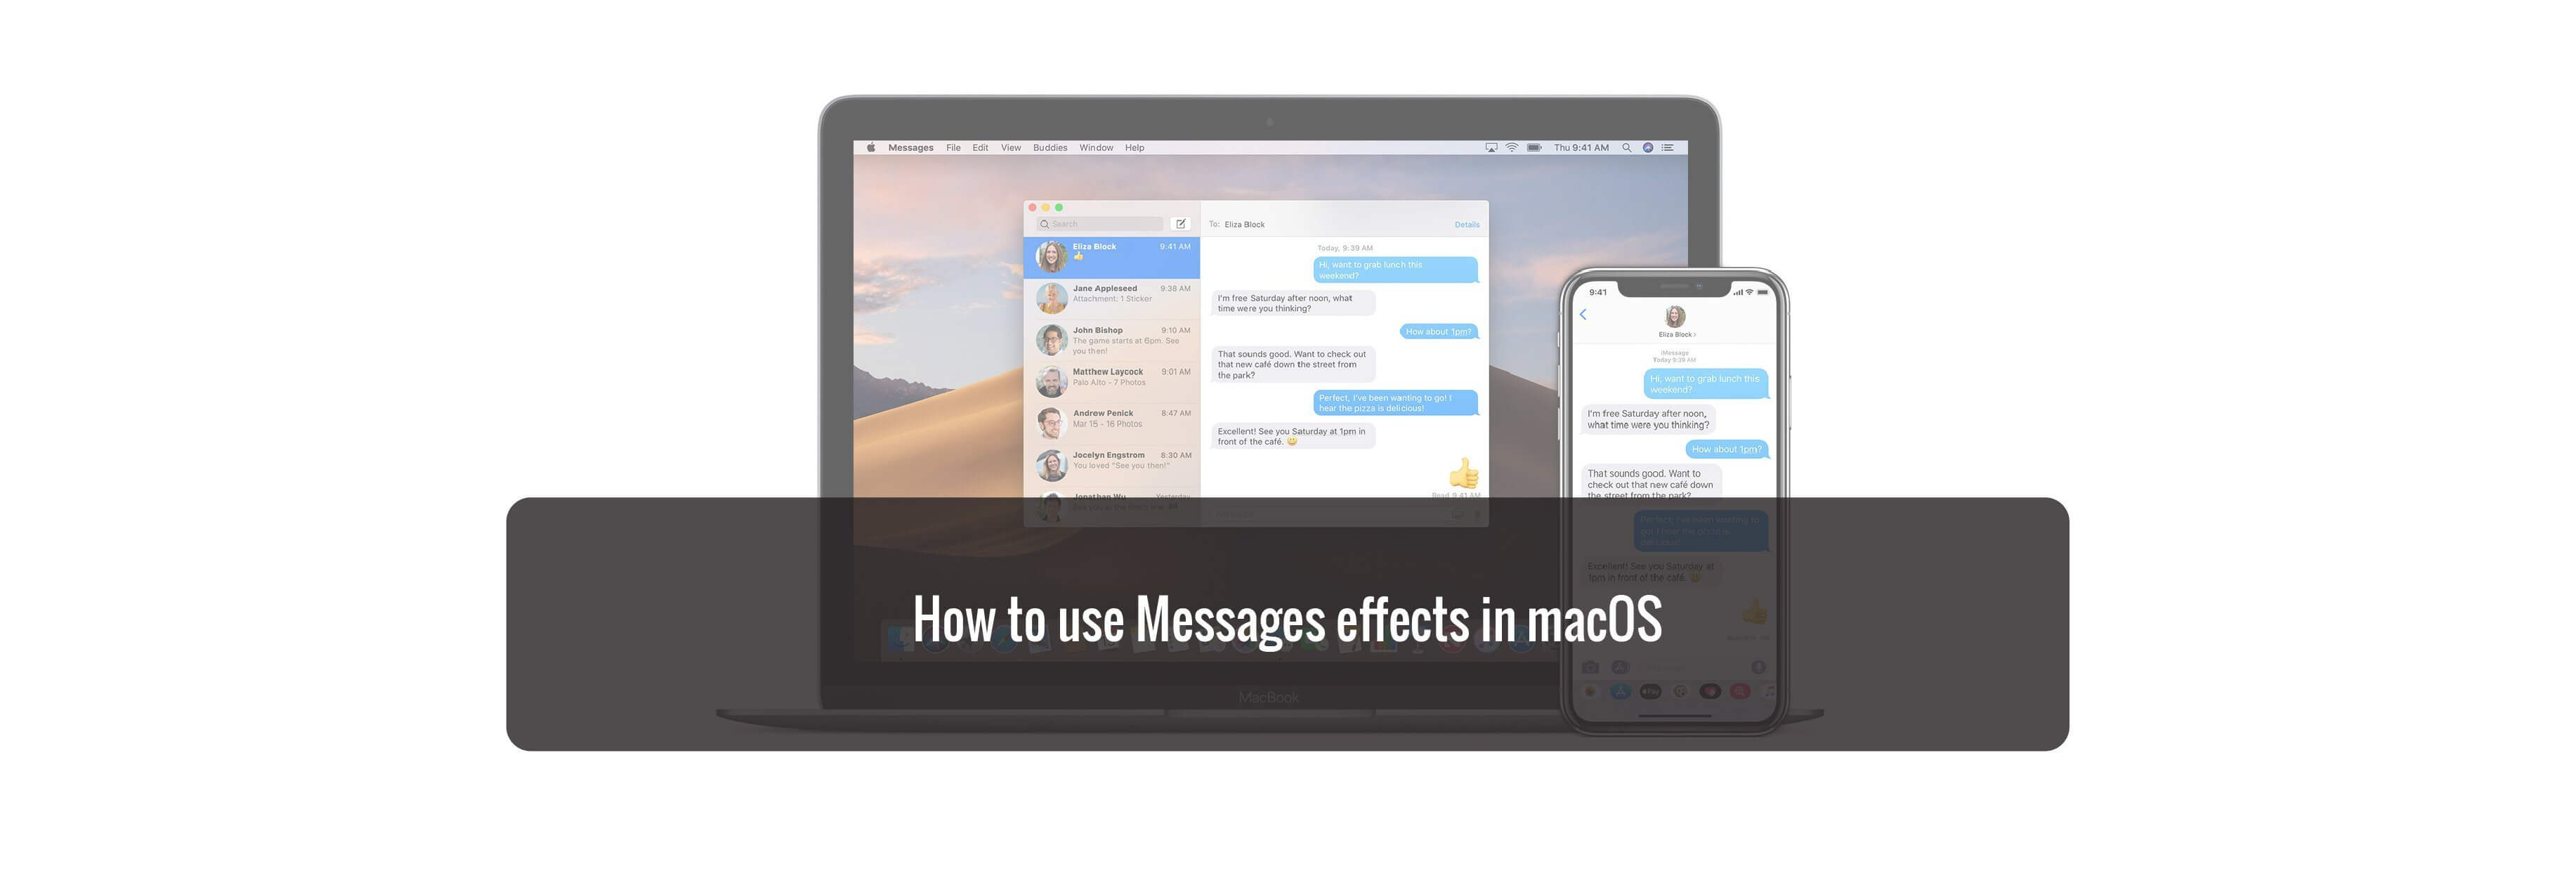 How to use Messages effects in macOS